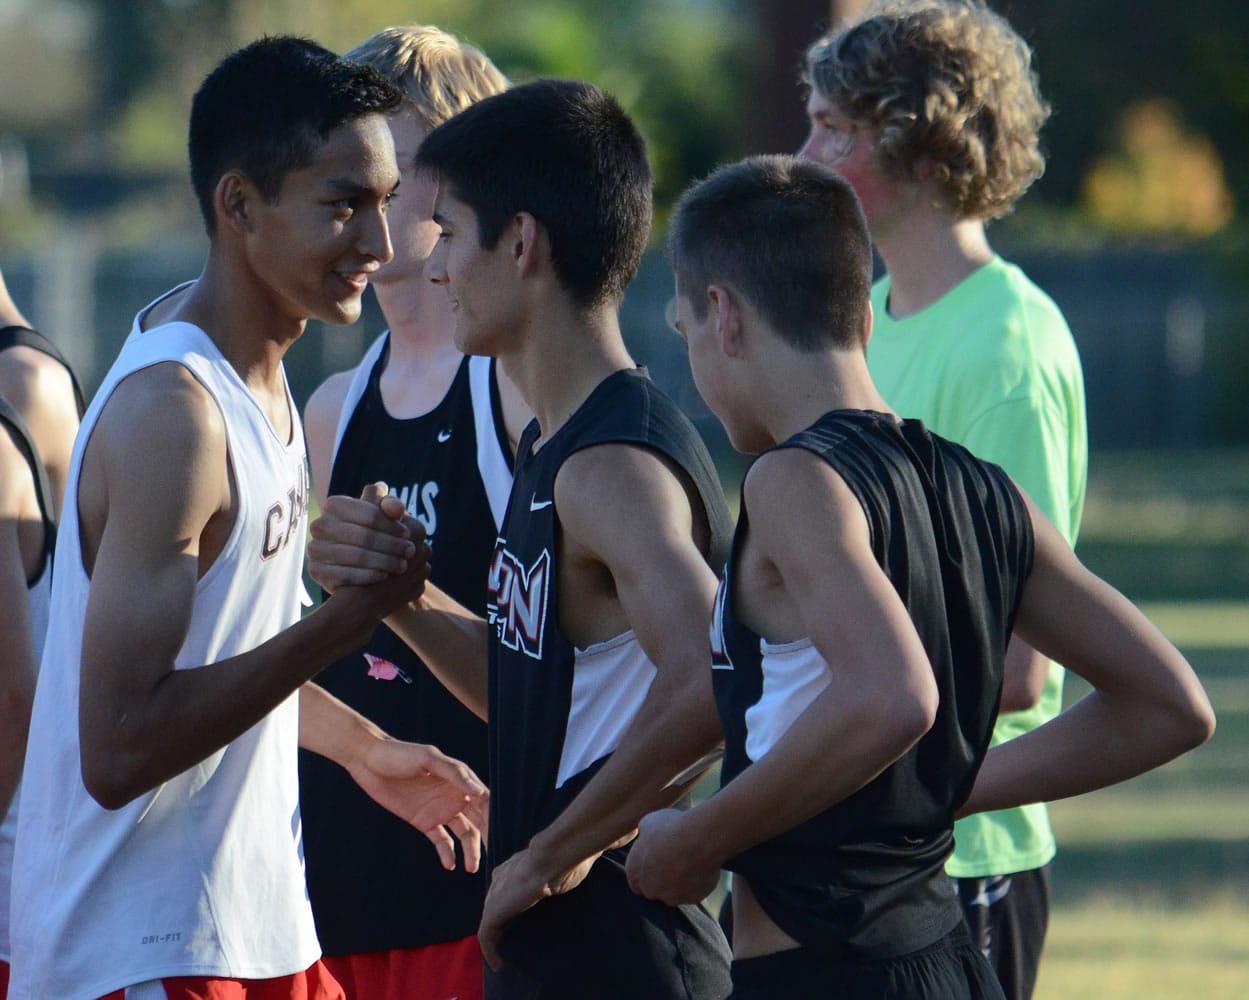 Camas runner Said Guermali, left, greets members of the Union cross country team before a race Tuesday at Pacific Park.